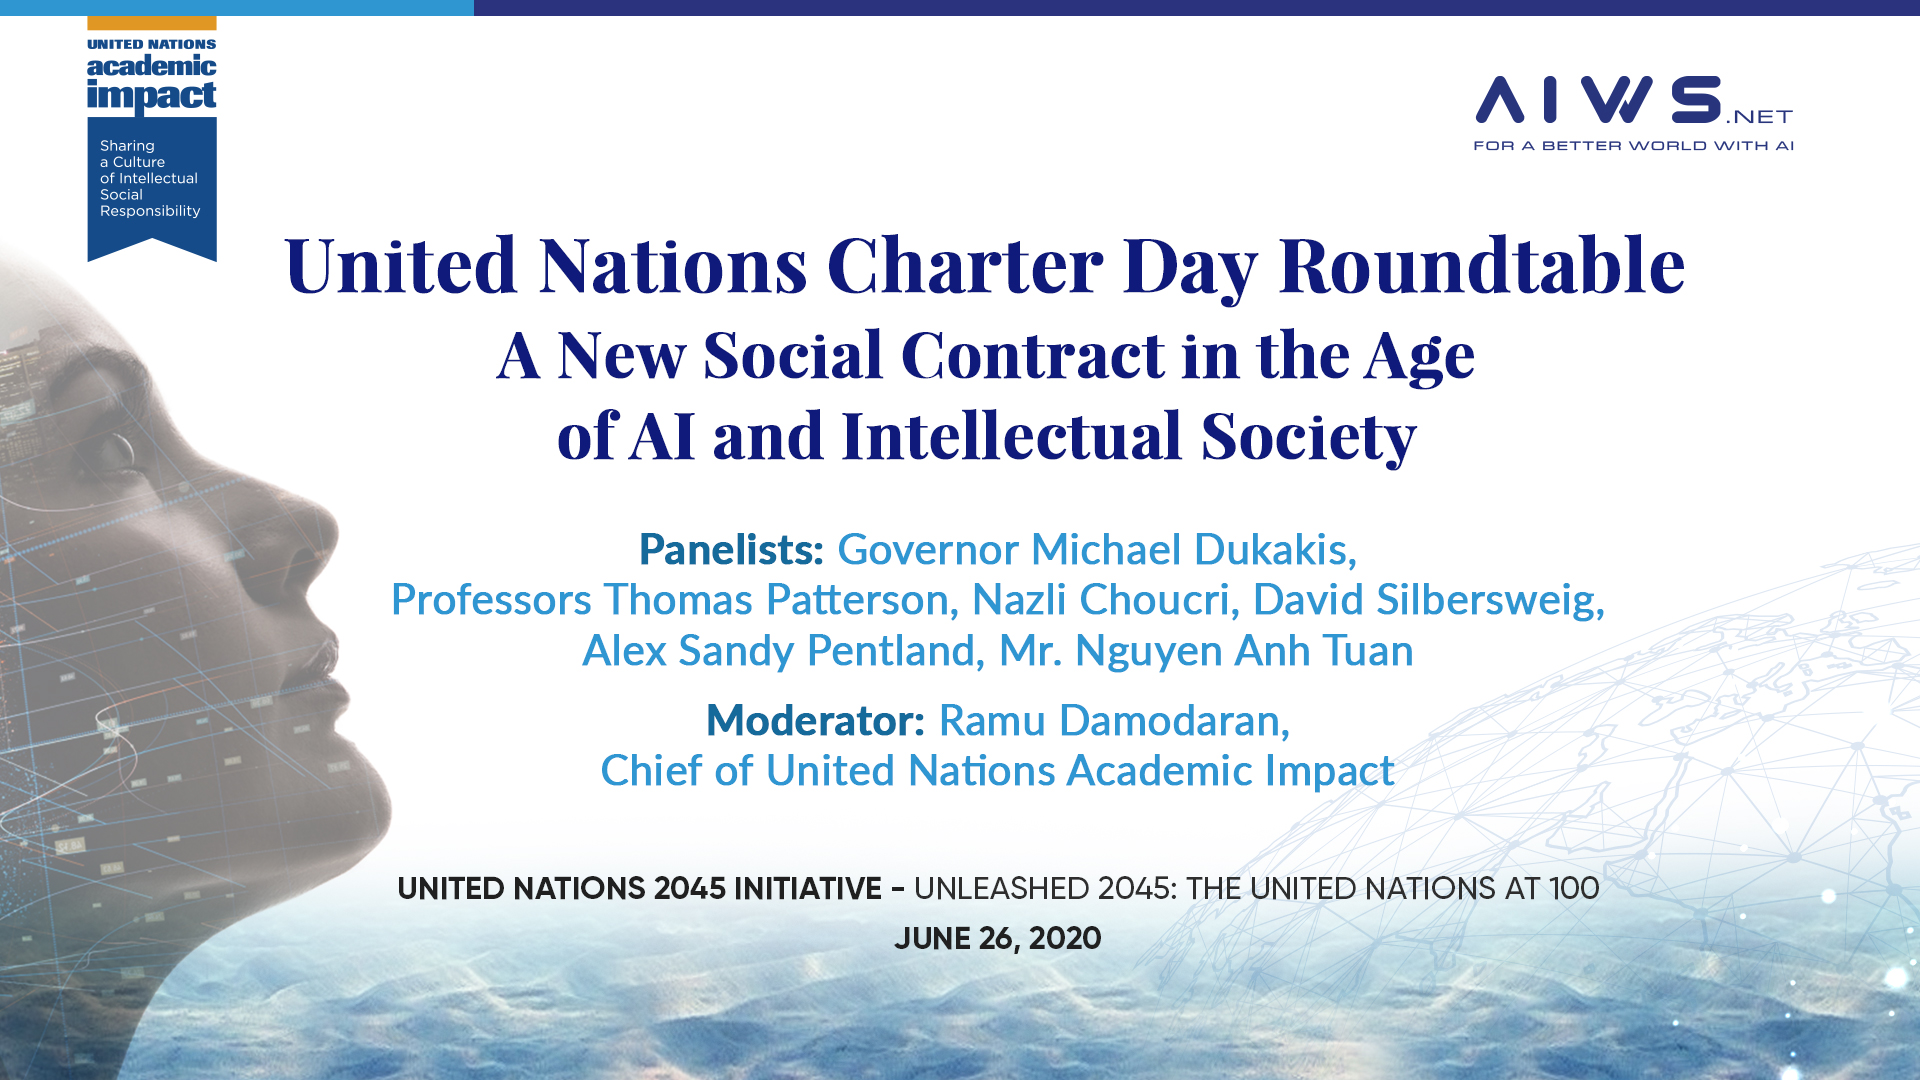 United Nations Charter Day Roundtable: The Social Contract 2020, A New Social Contract in the Age of AI, and Intellectual Society